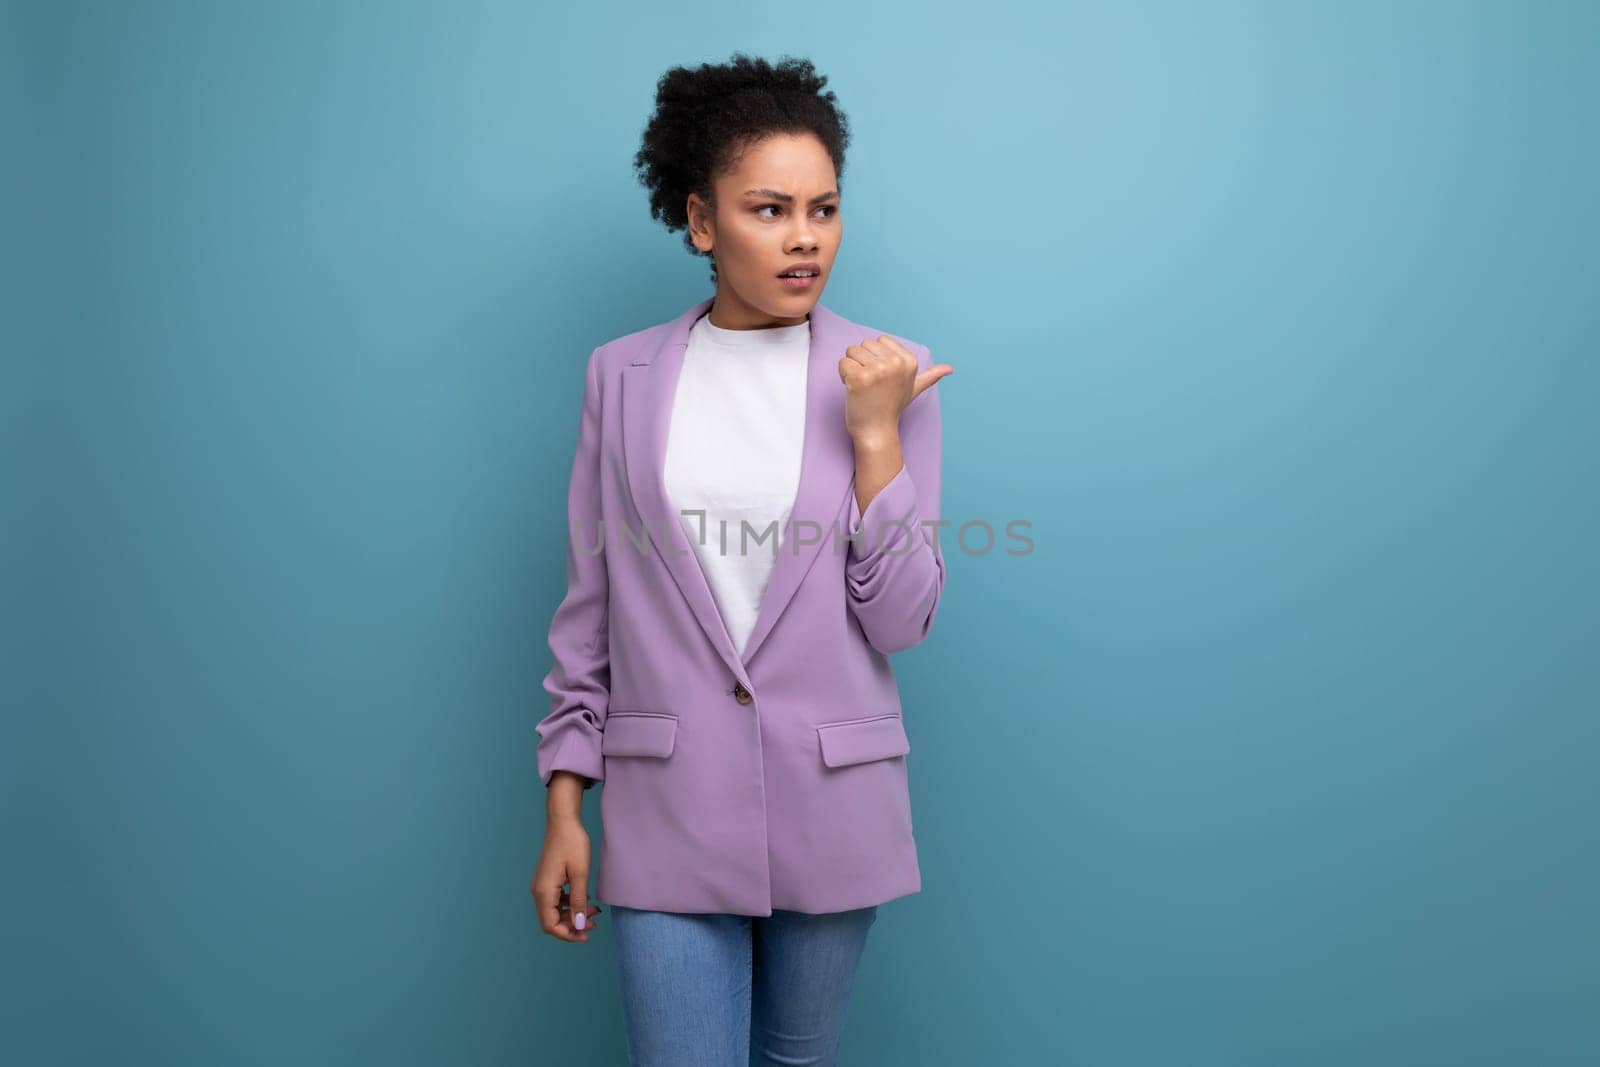 young latin business woman with ponytail hairstyle dressed in purple jacket on studio background with copy space by TRMK